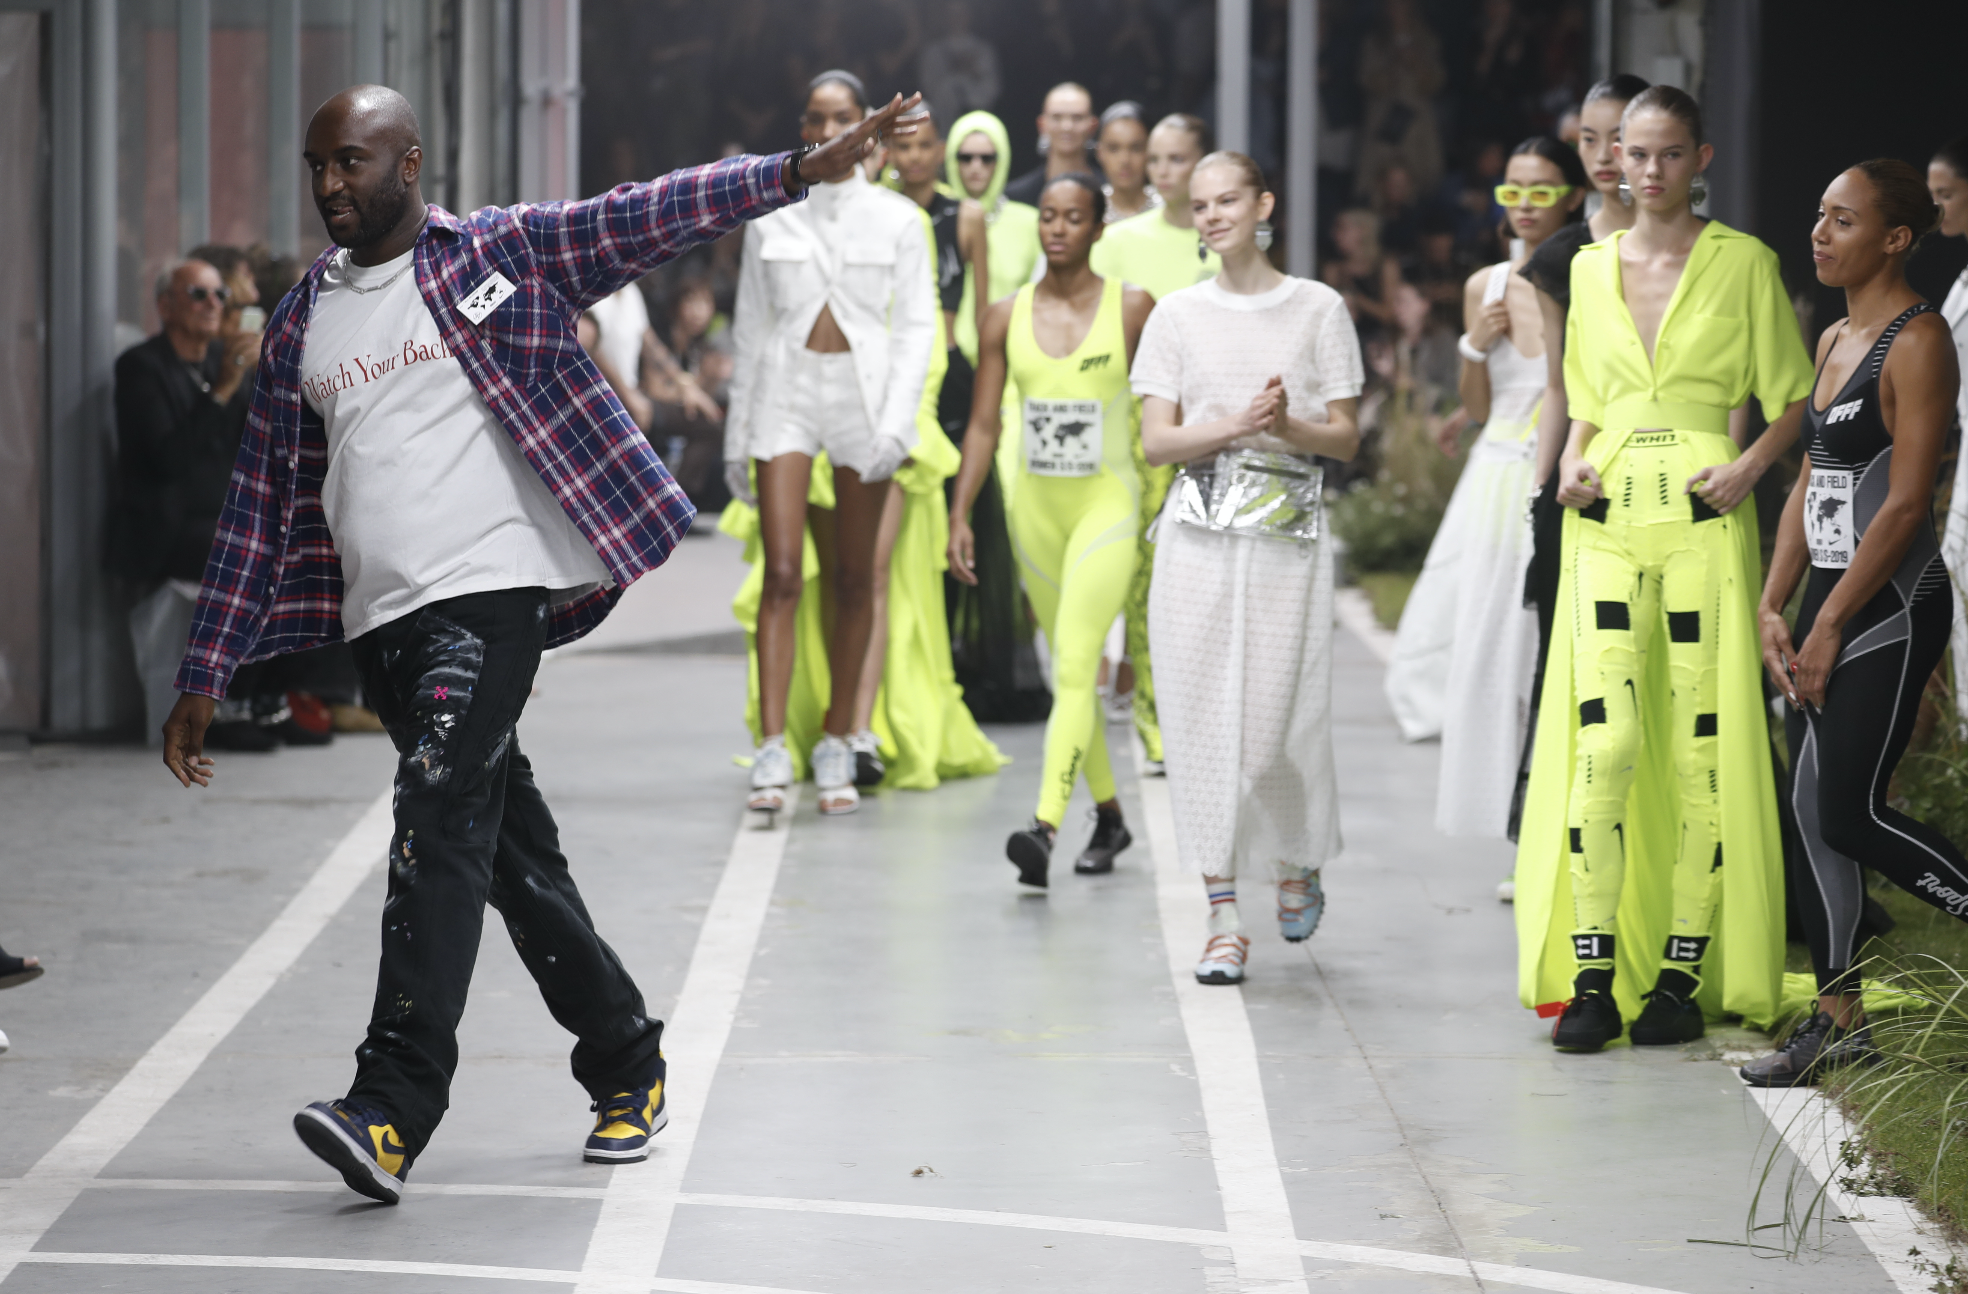 A Virgil Abloh exhibition is opening at the Brooklyn Museum this summer